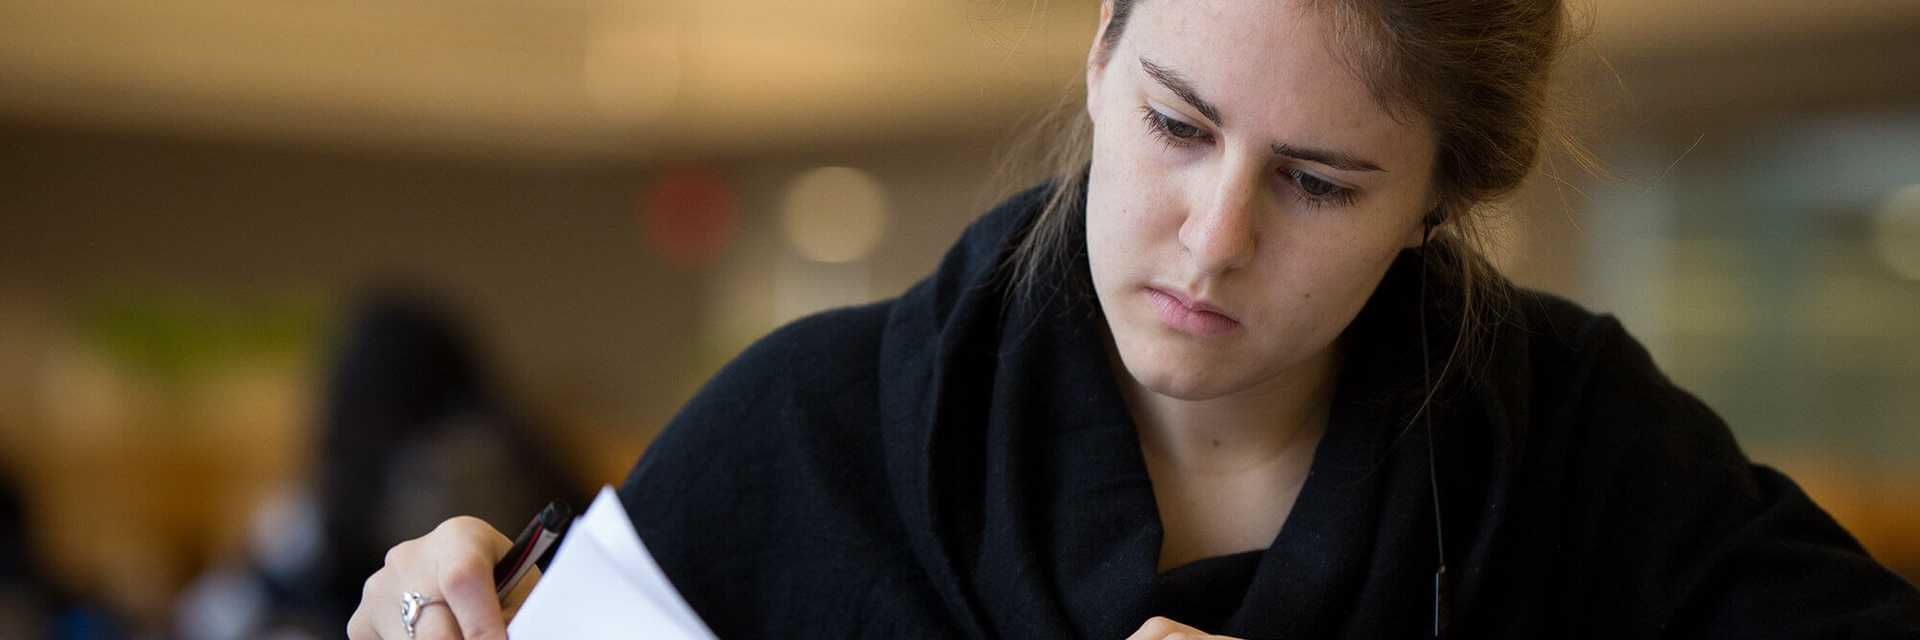 Close-up photo of a Case Western Reserve University student studying indoors